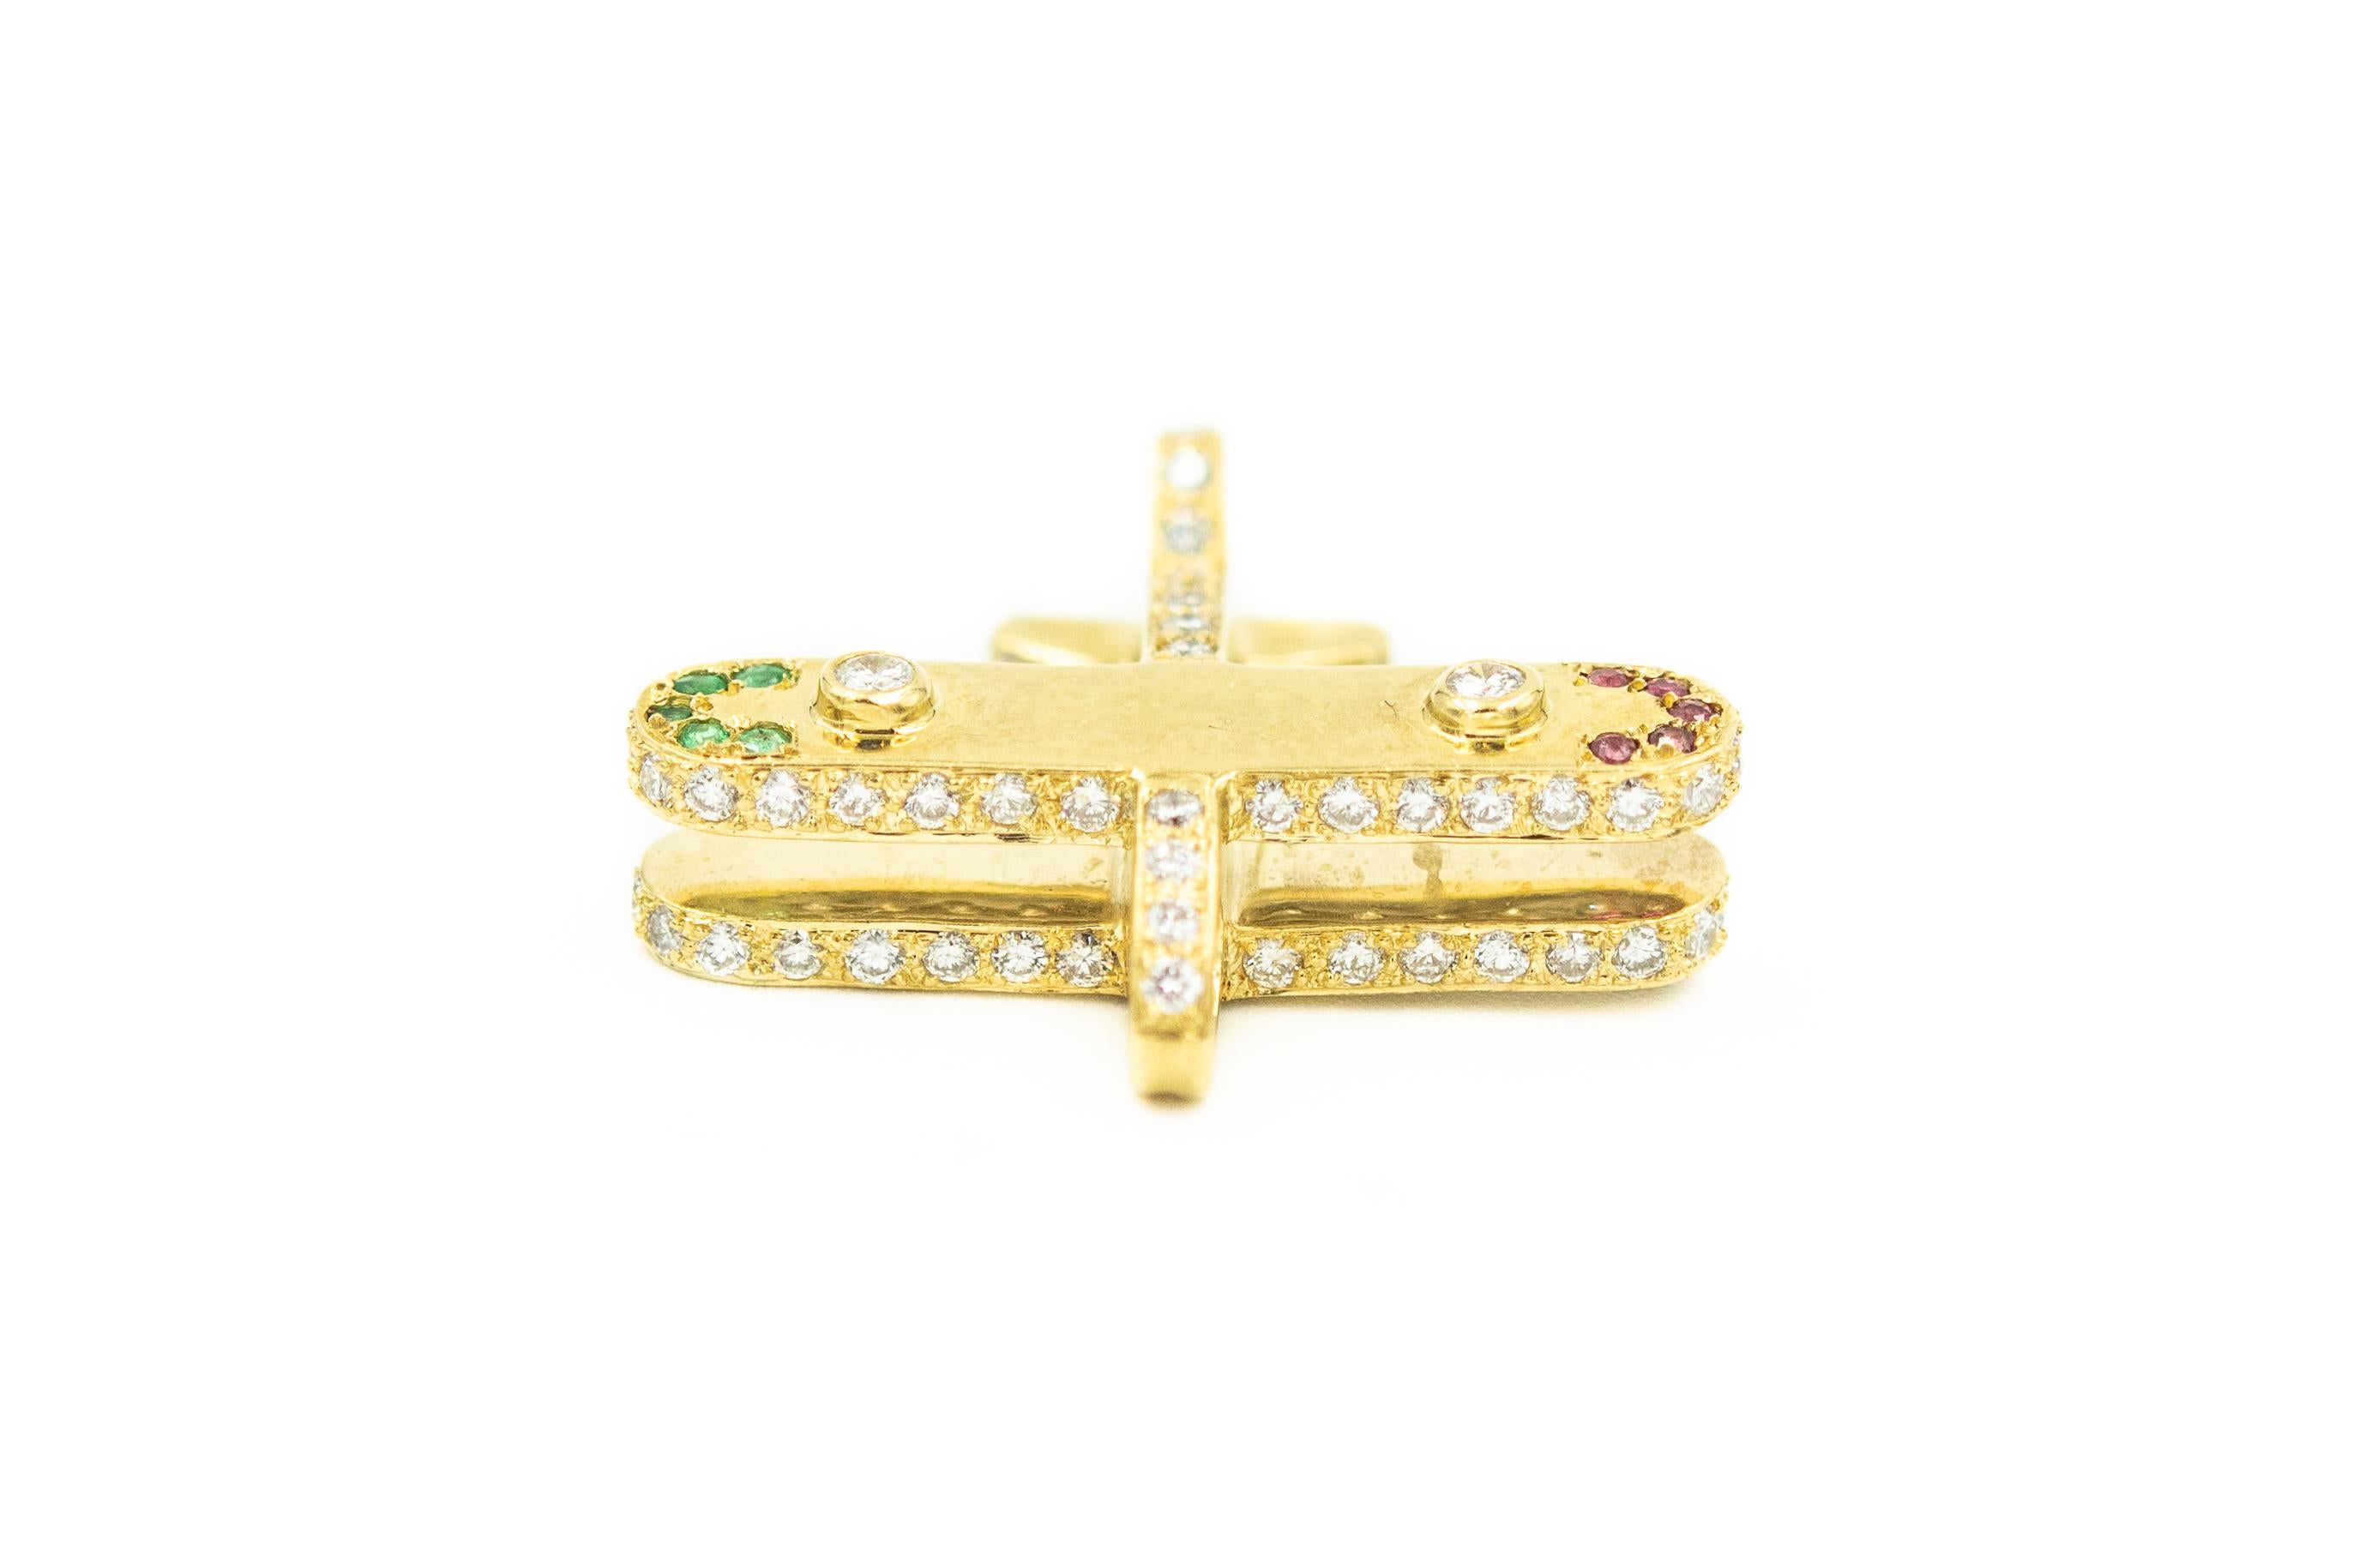 Women's or Men's Diamond Ruby Emerald Jeweled Airplane Plane Yellow Gold Necklace Pendant Charm